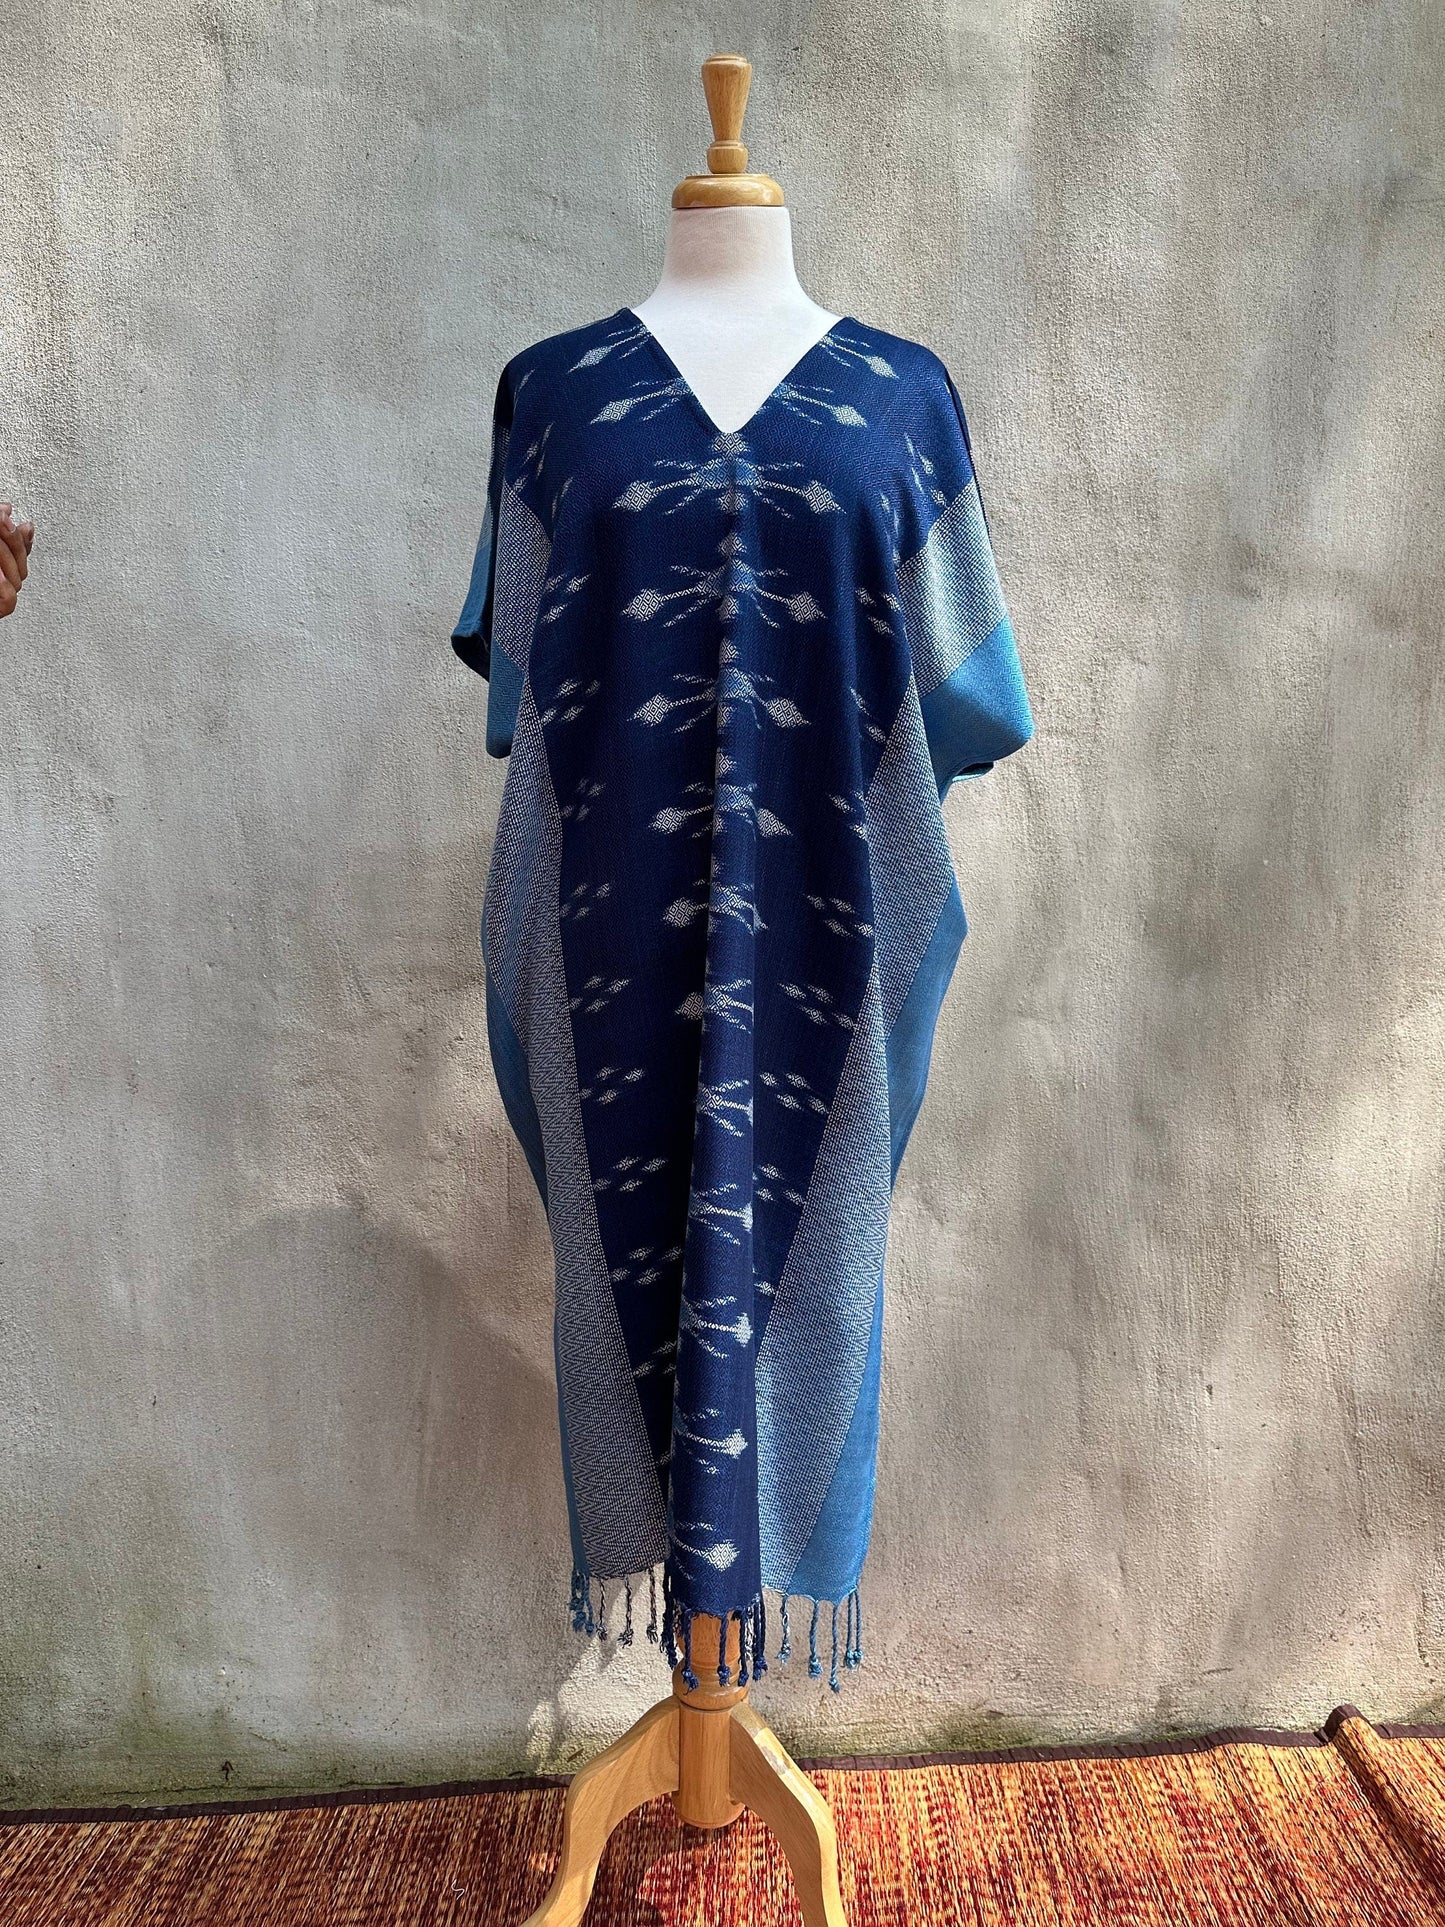 MALA handworks  Ikat Hand Woven Pattern Kaftan in Indigo Blue with Light Blue and White